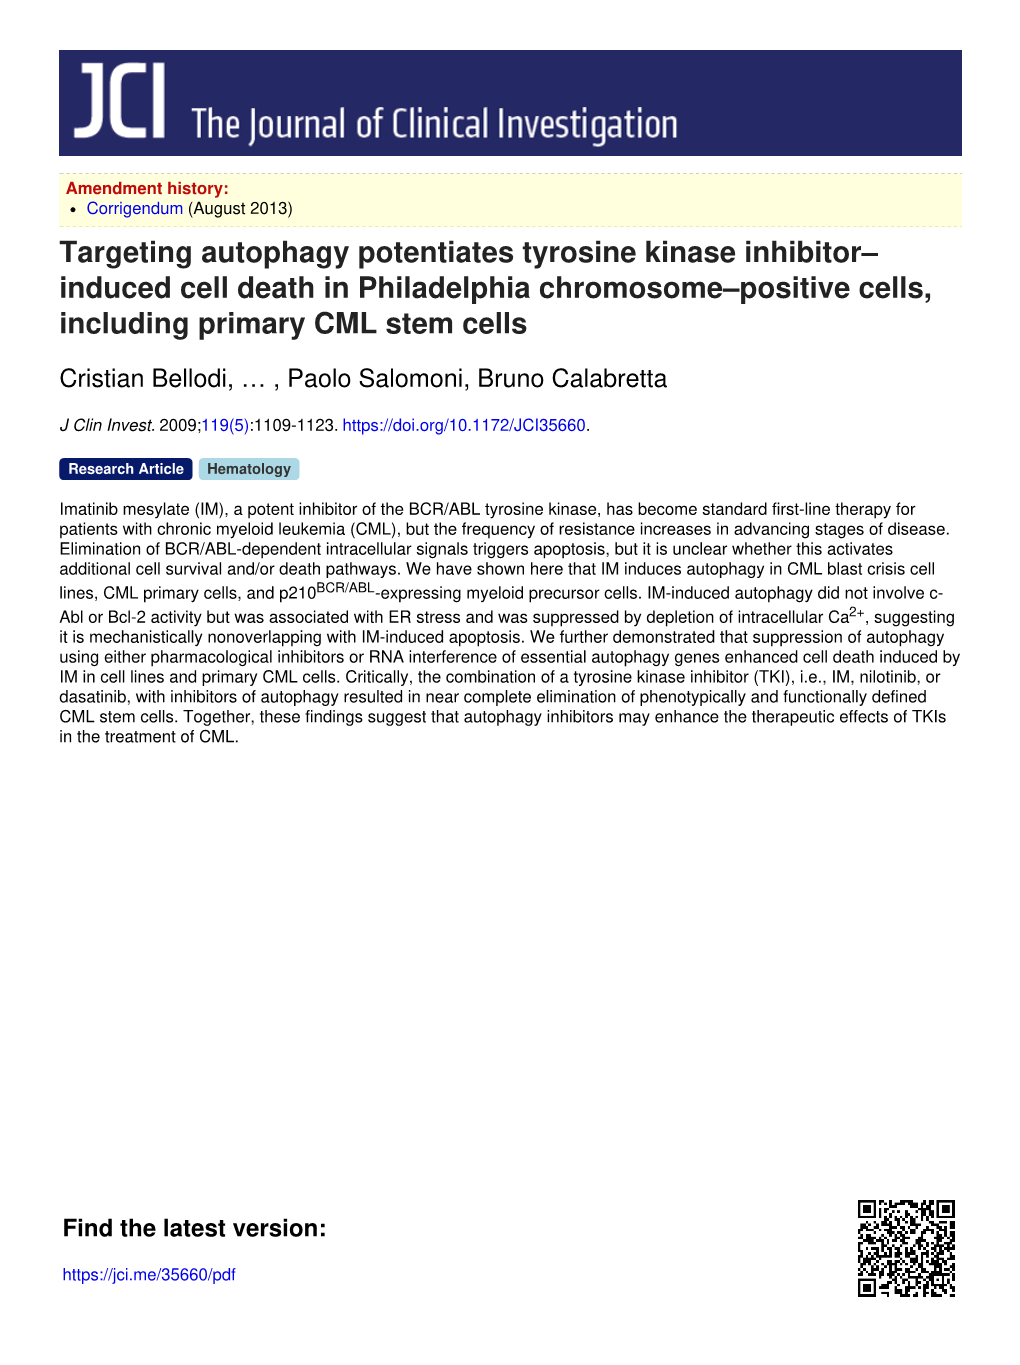 Targeting Autophagy Potentiates Tyrosine Kinase Inhibitor– Induced Cell Death in Philadelphia Chromosome–Positive Cells, Including Primary CML Stem Cells